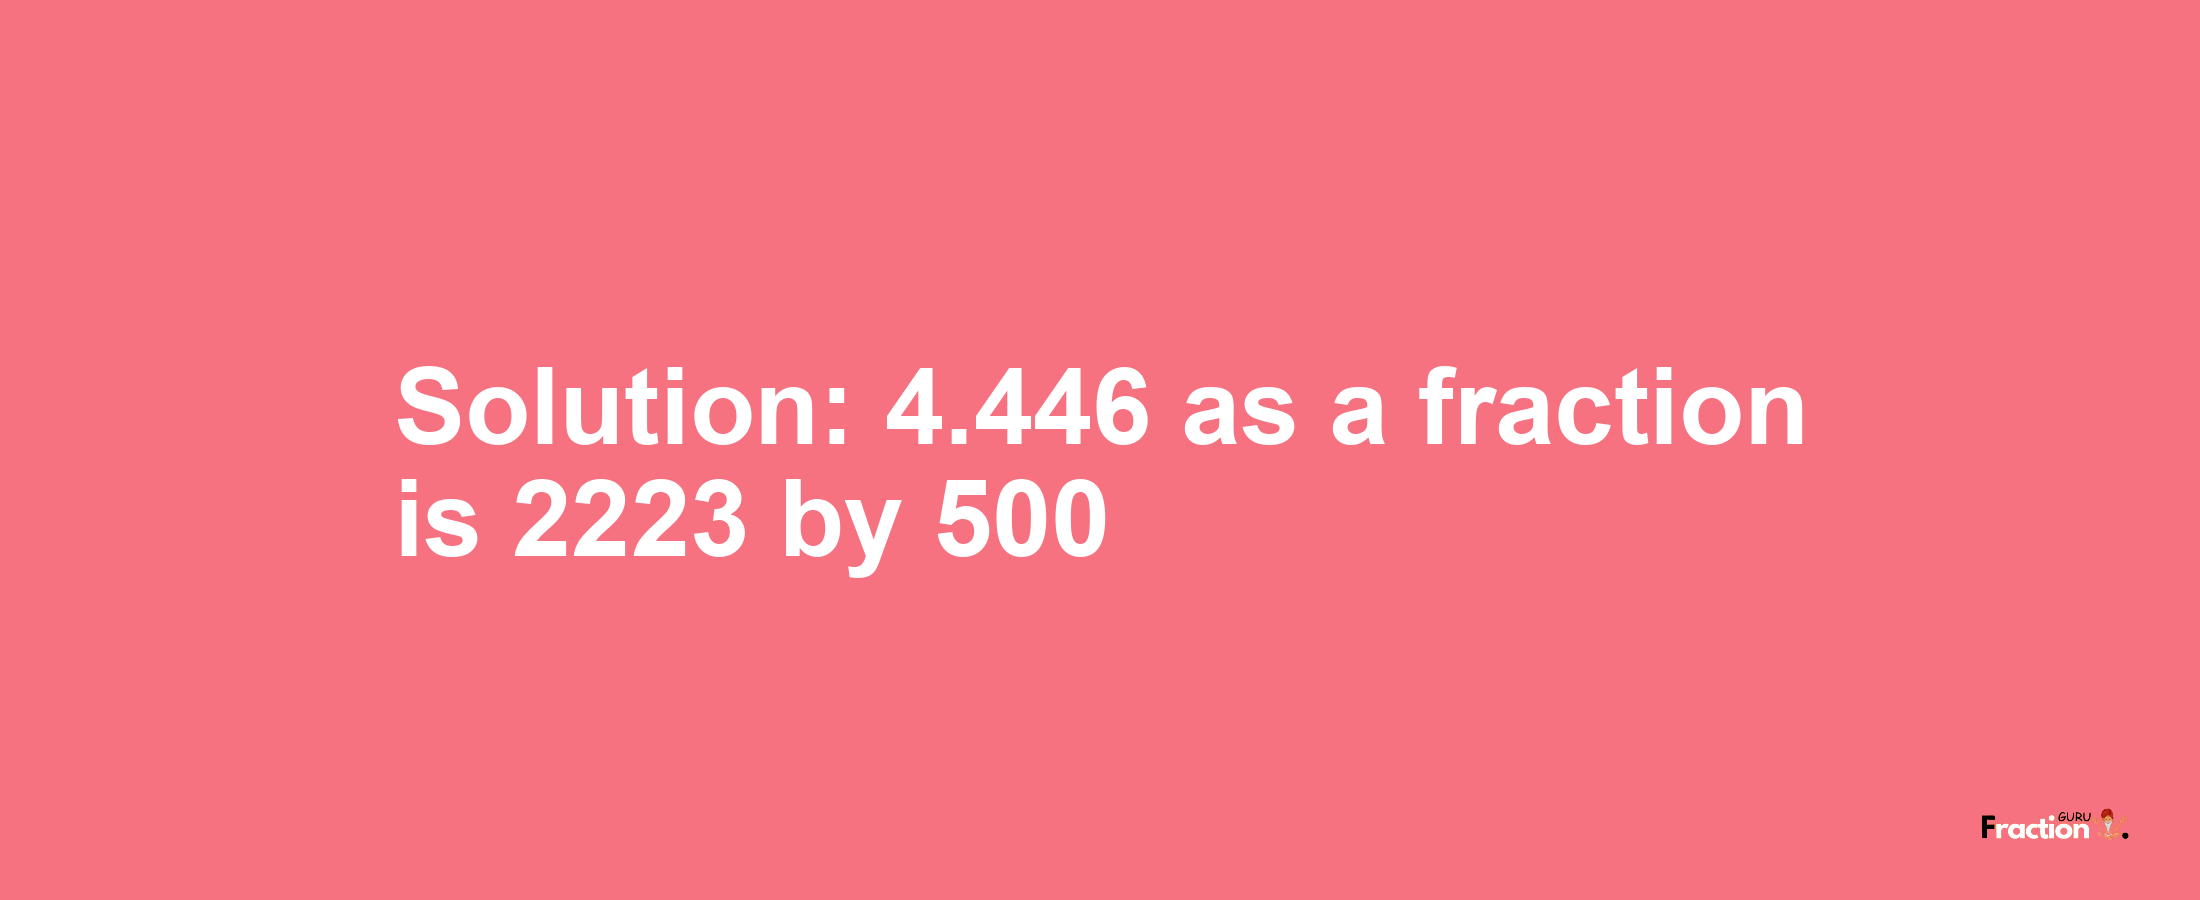 Solution:4.446 as a fraction is 2223/500